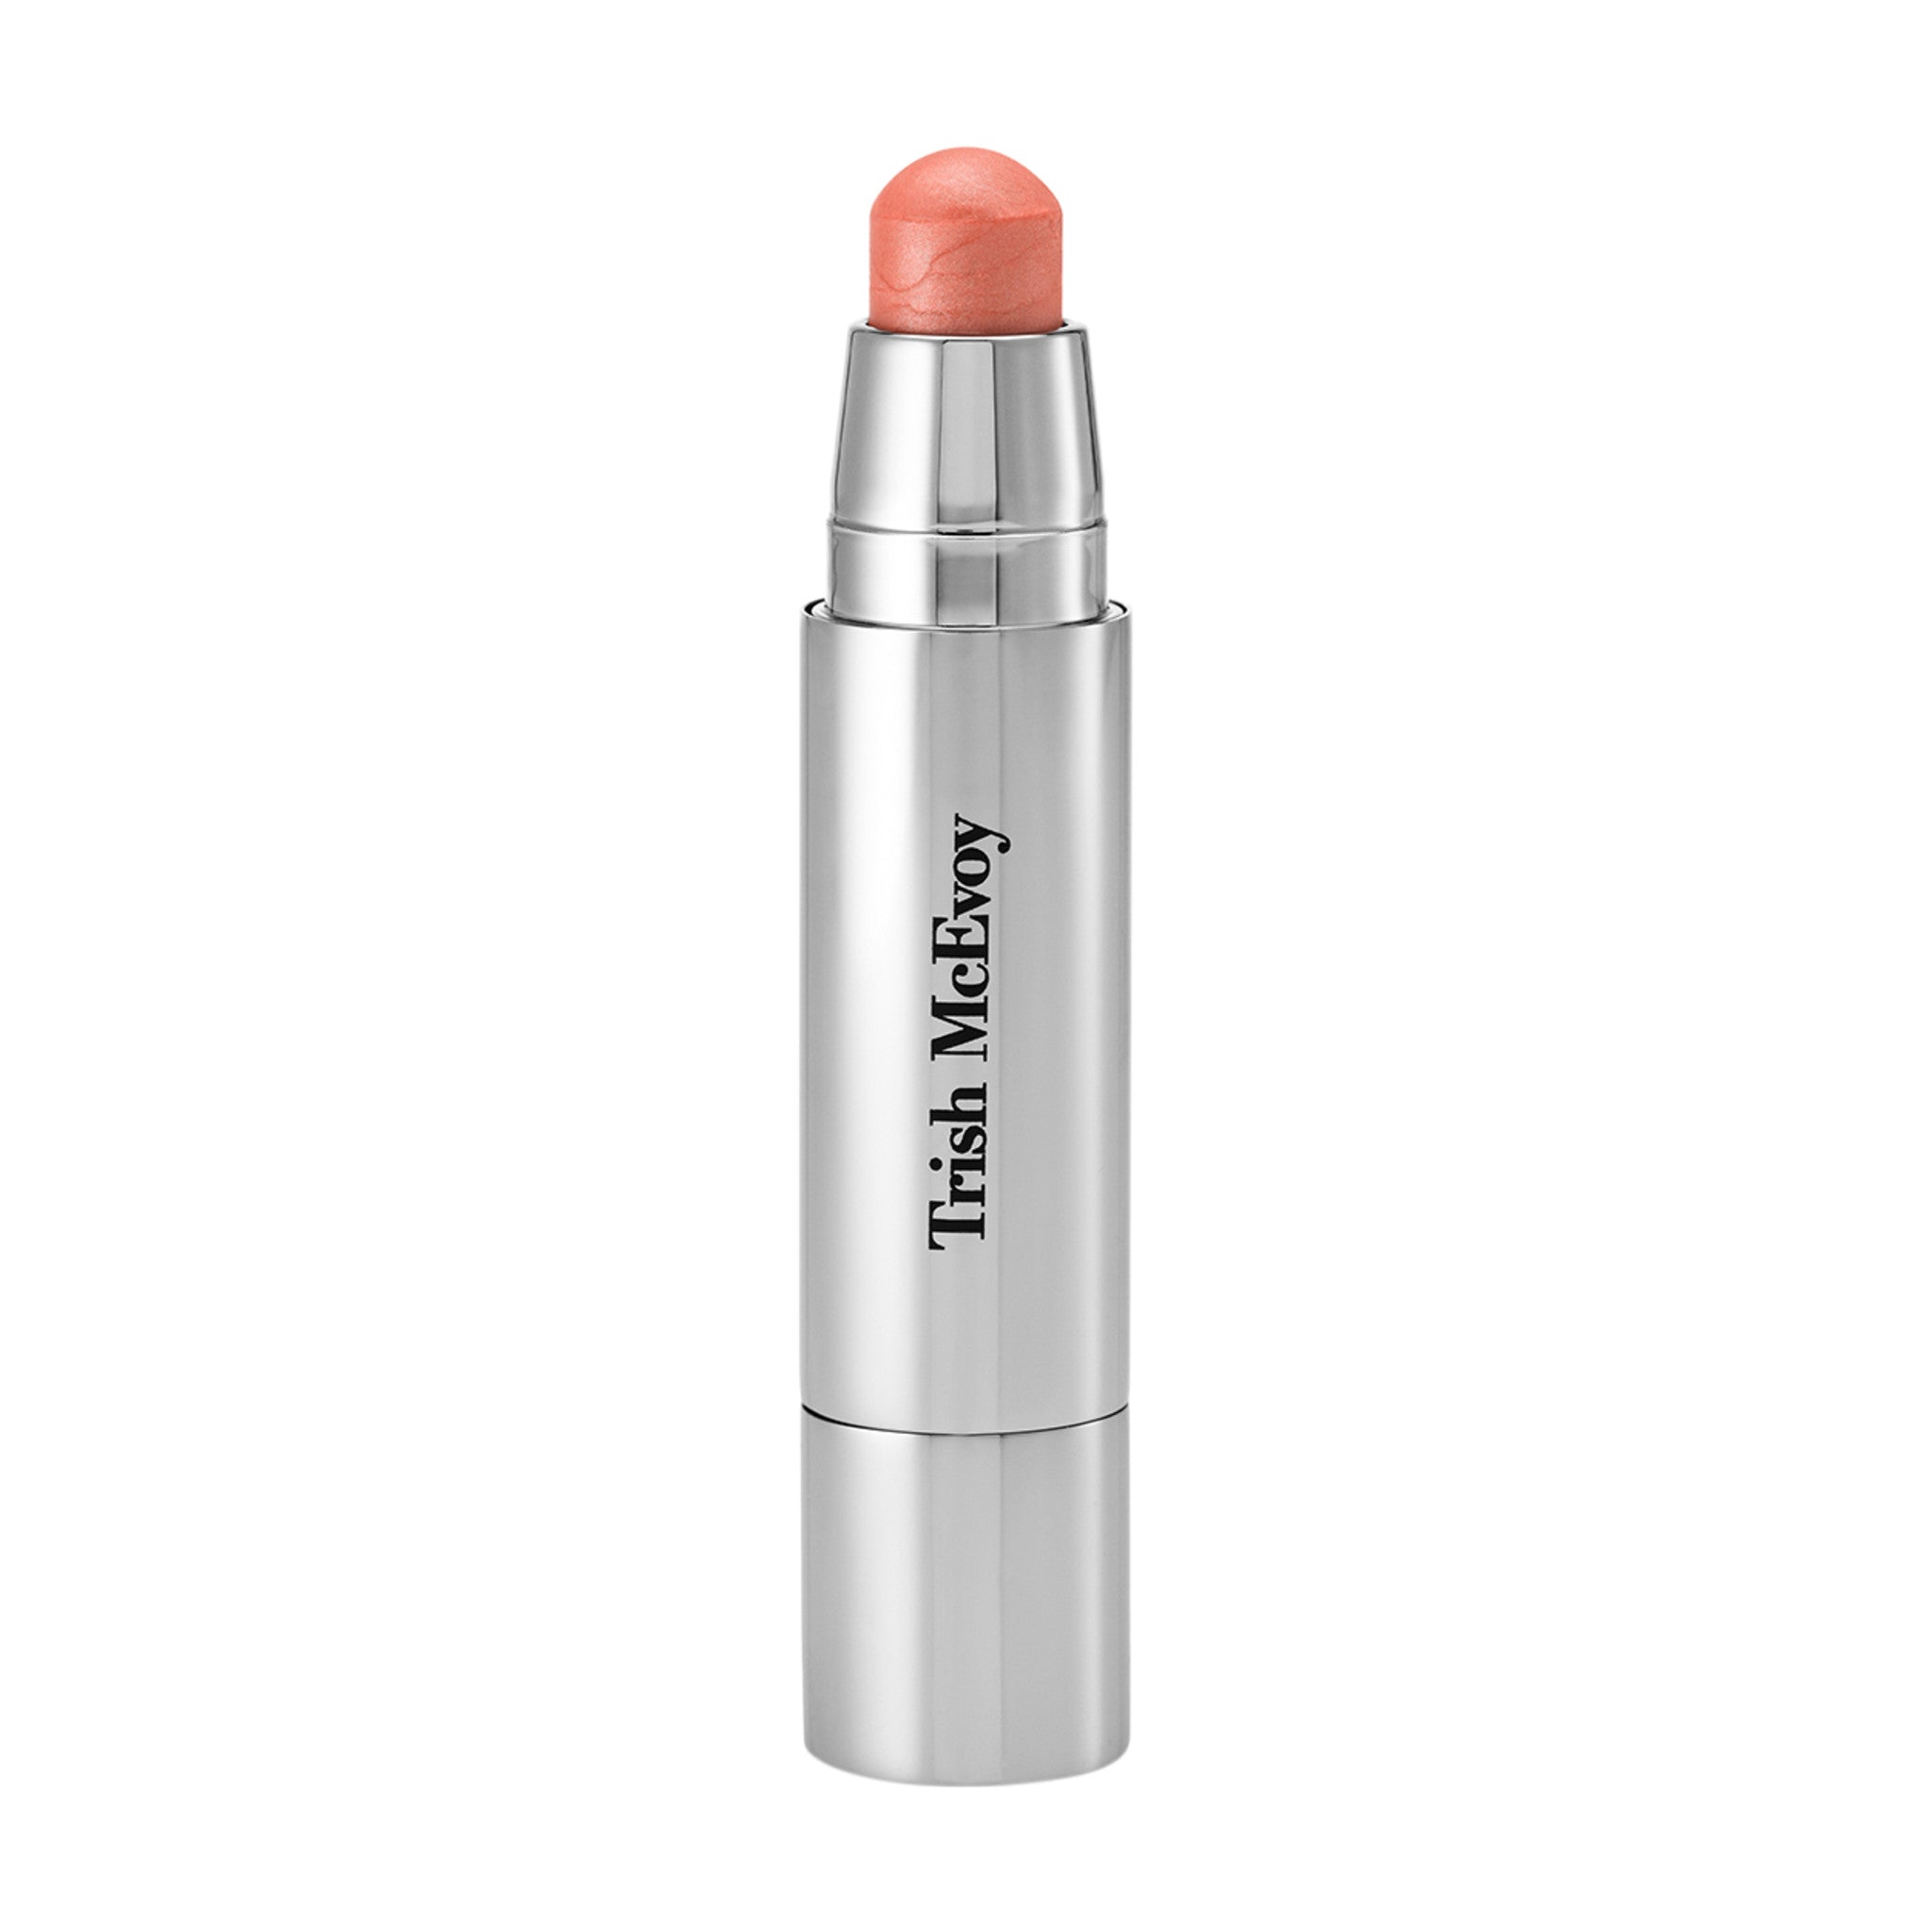 Trish McEvoy Fast-Track Face Stick Glow main image. This product is in the color pink